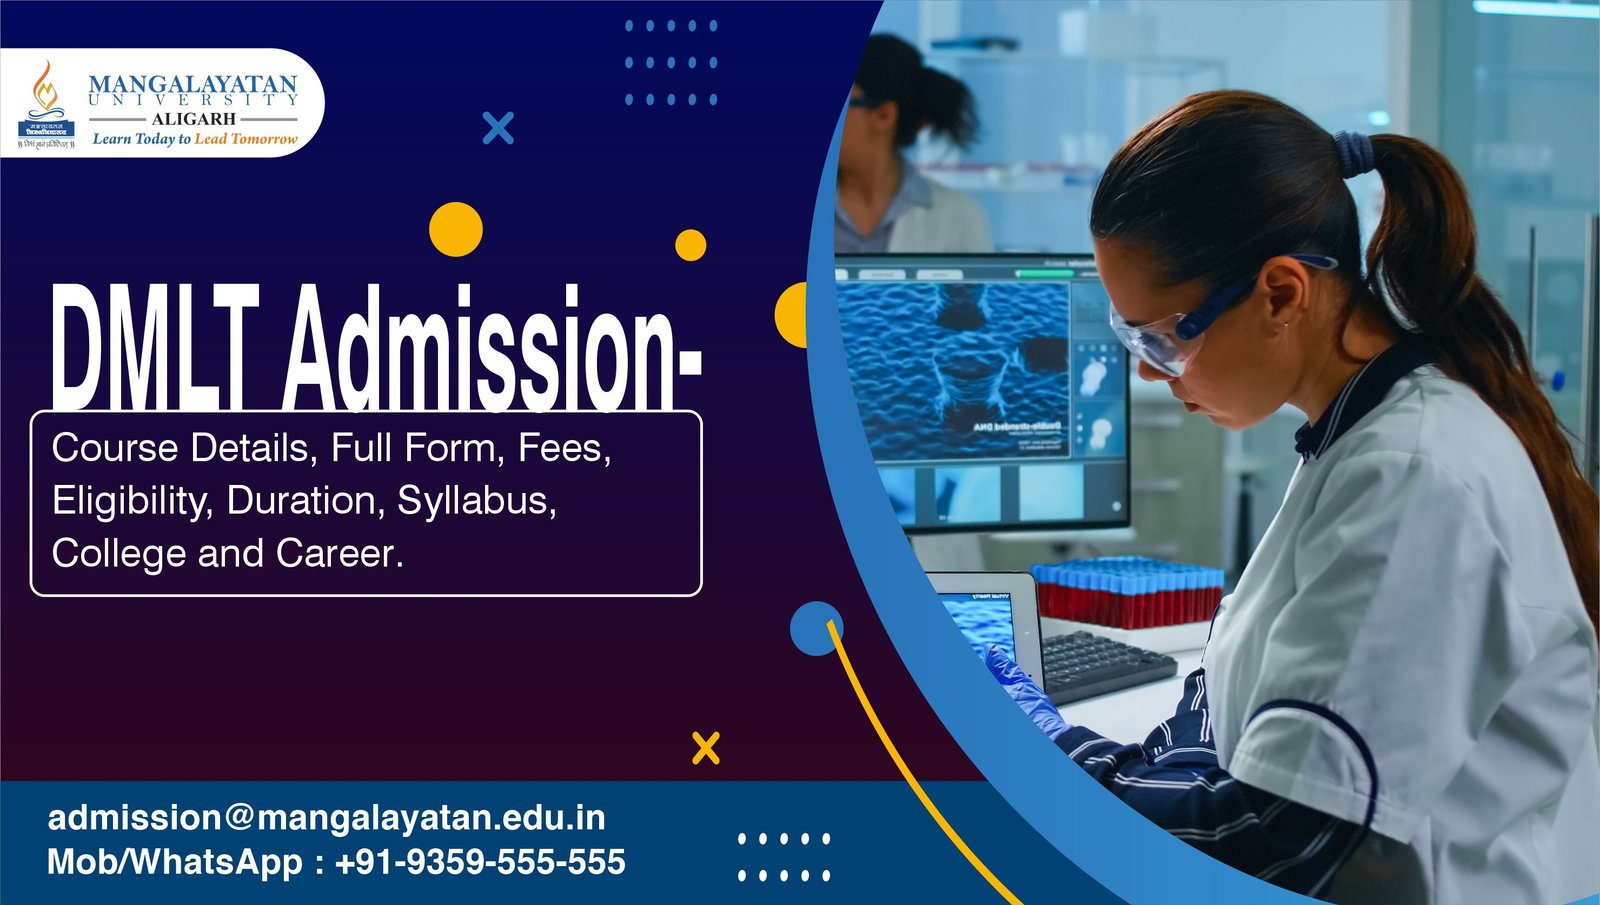 DMLT Admission- Course Details, Full Form, Fees, Eligibility, Duration, Syllabus, College and Career